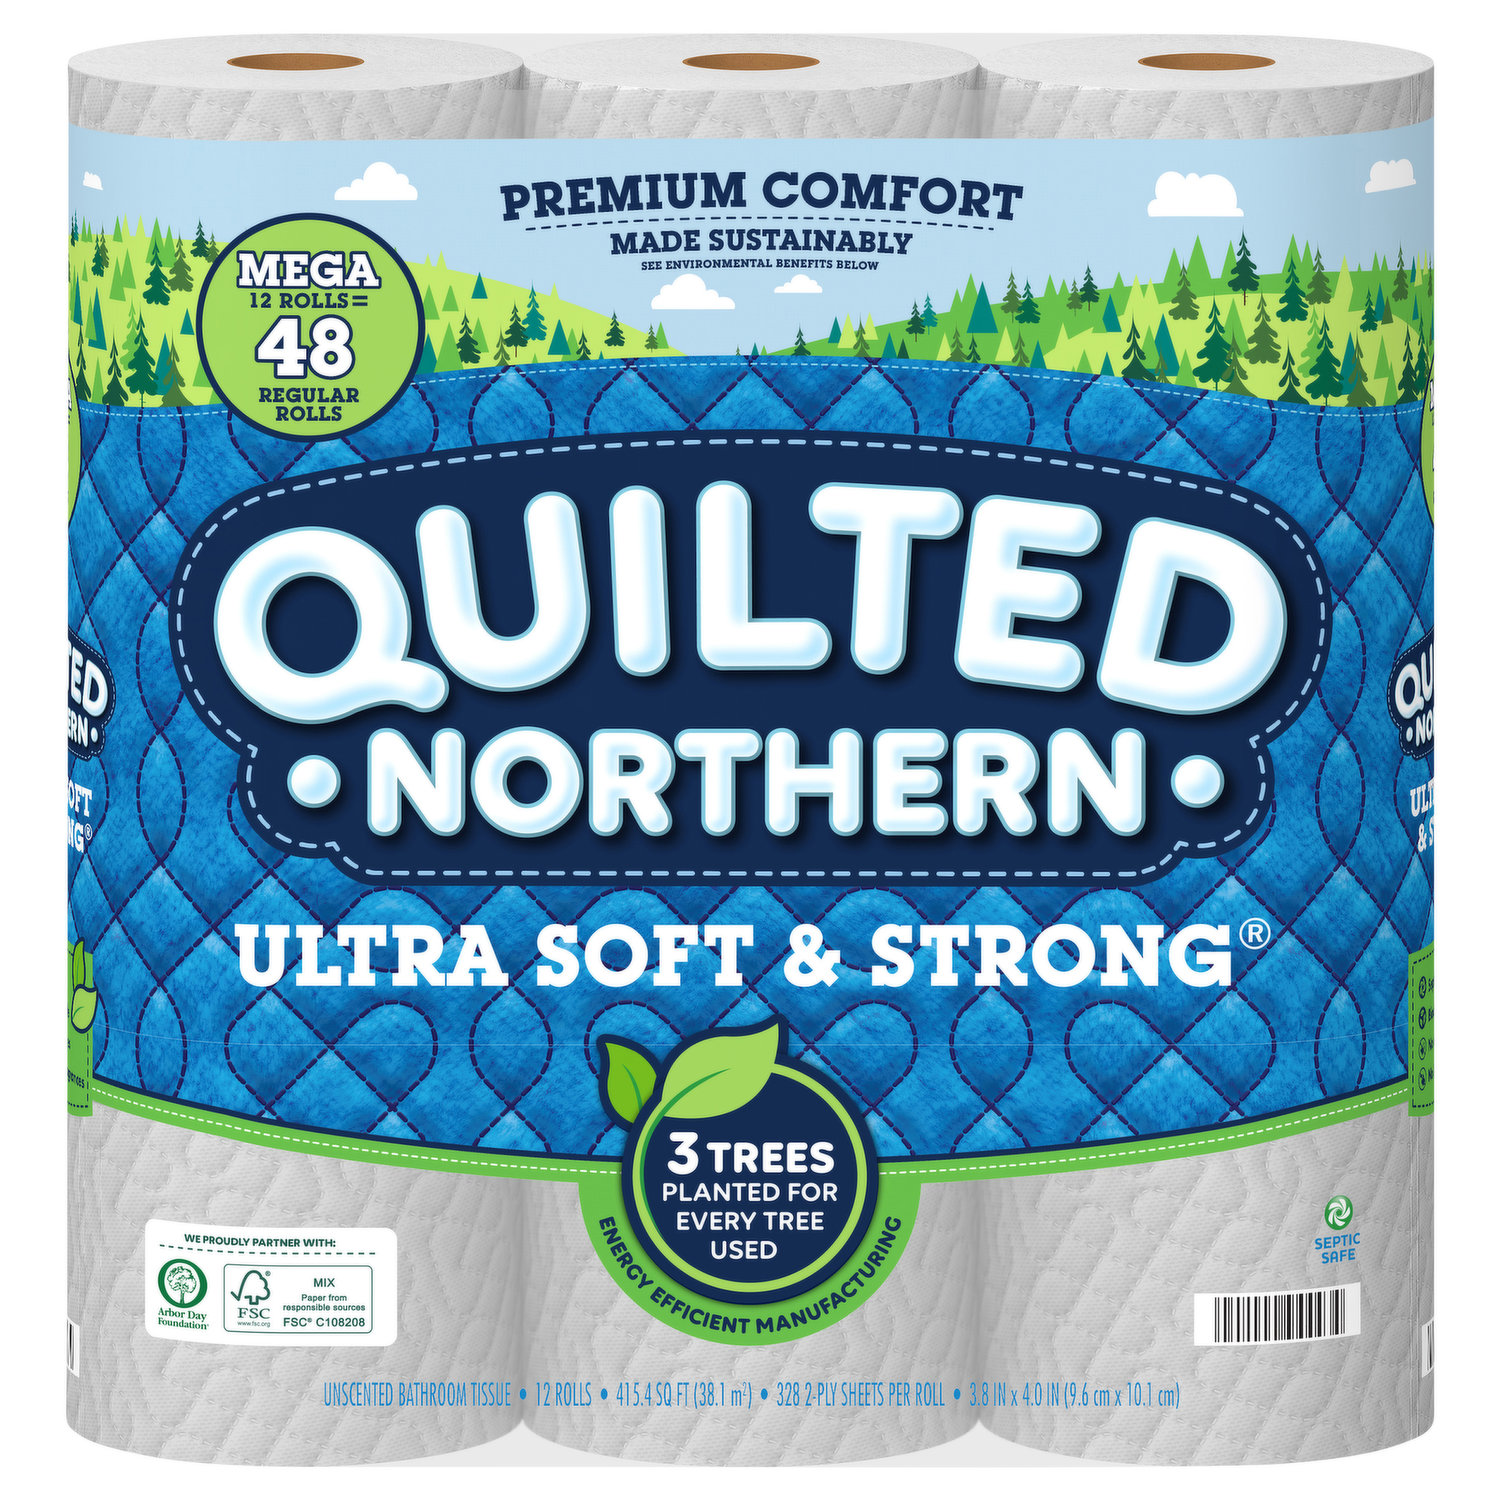 Quilted Northern Bathroom Tissue, Unscented, Super Absorbent, Regular  Rolls, 2-Ply, Paper & Plastic